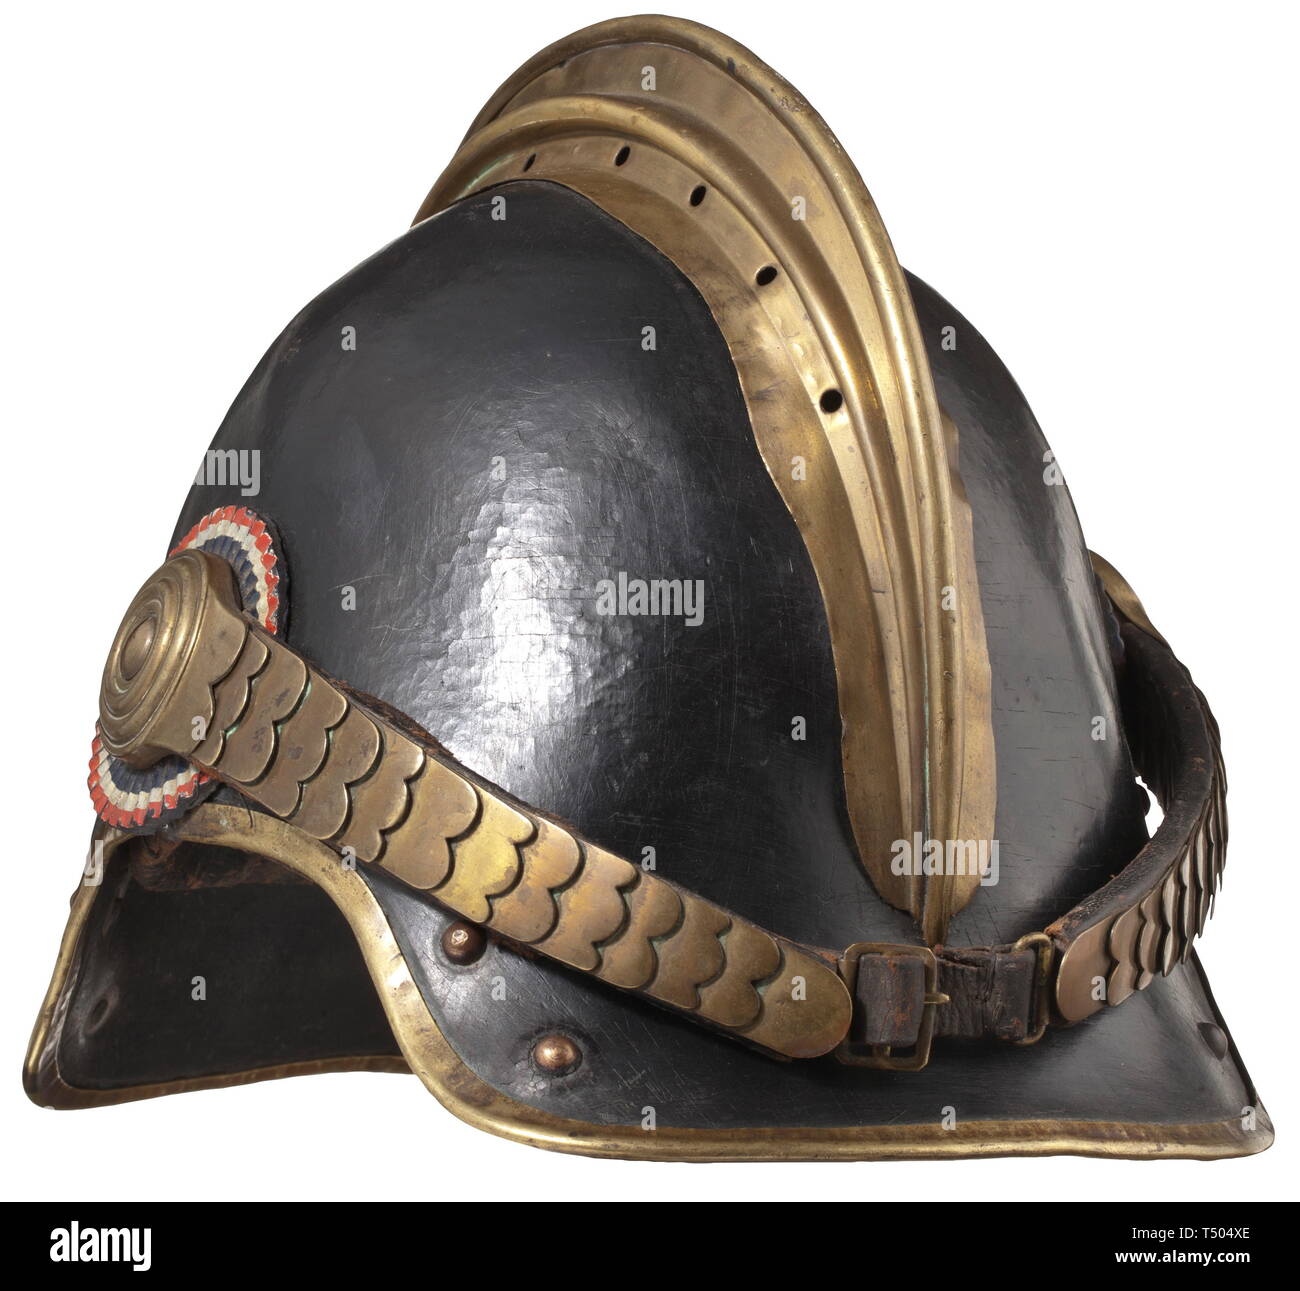 A 'Detaille' experimental helmet of the infantry M 13. Pressed leather skull with brass comb, brass trim and chin scales with French cockades. Inner liner of black leather. A very rare helmet in good condition. historic, historical, 20th century, Europe, Additional-Rights-Clearance-Info-Not-Available Stock Photo